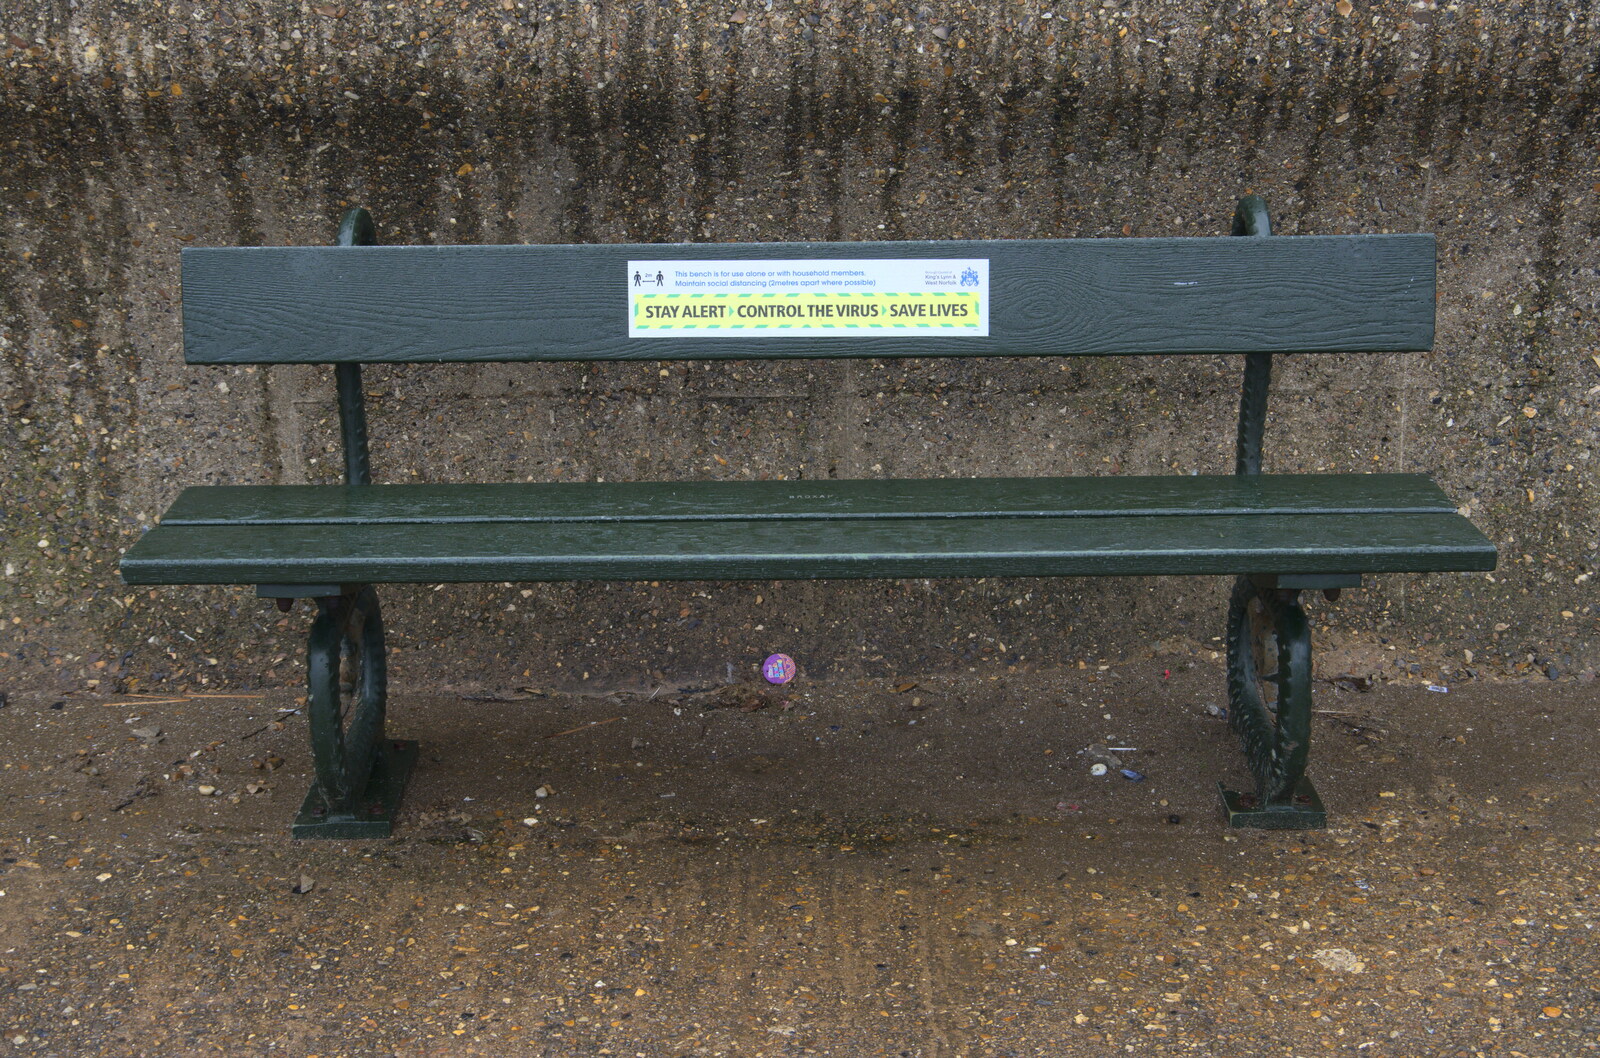 A Covid bench from A Postcard From Kings Lynn and "Sunny Hunny" Hunstanton, Norfolk - 31st October 2020